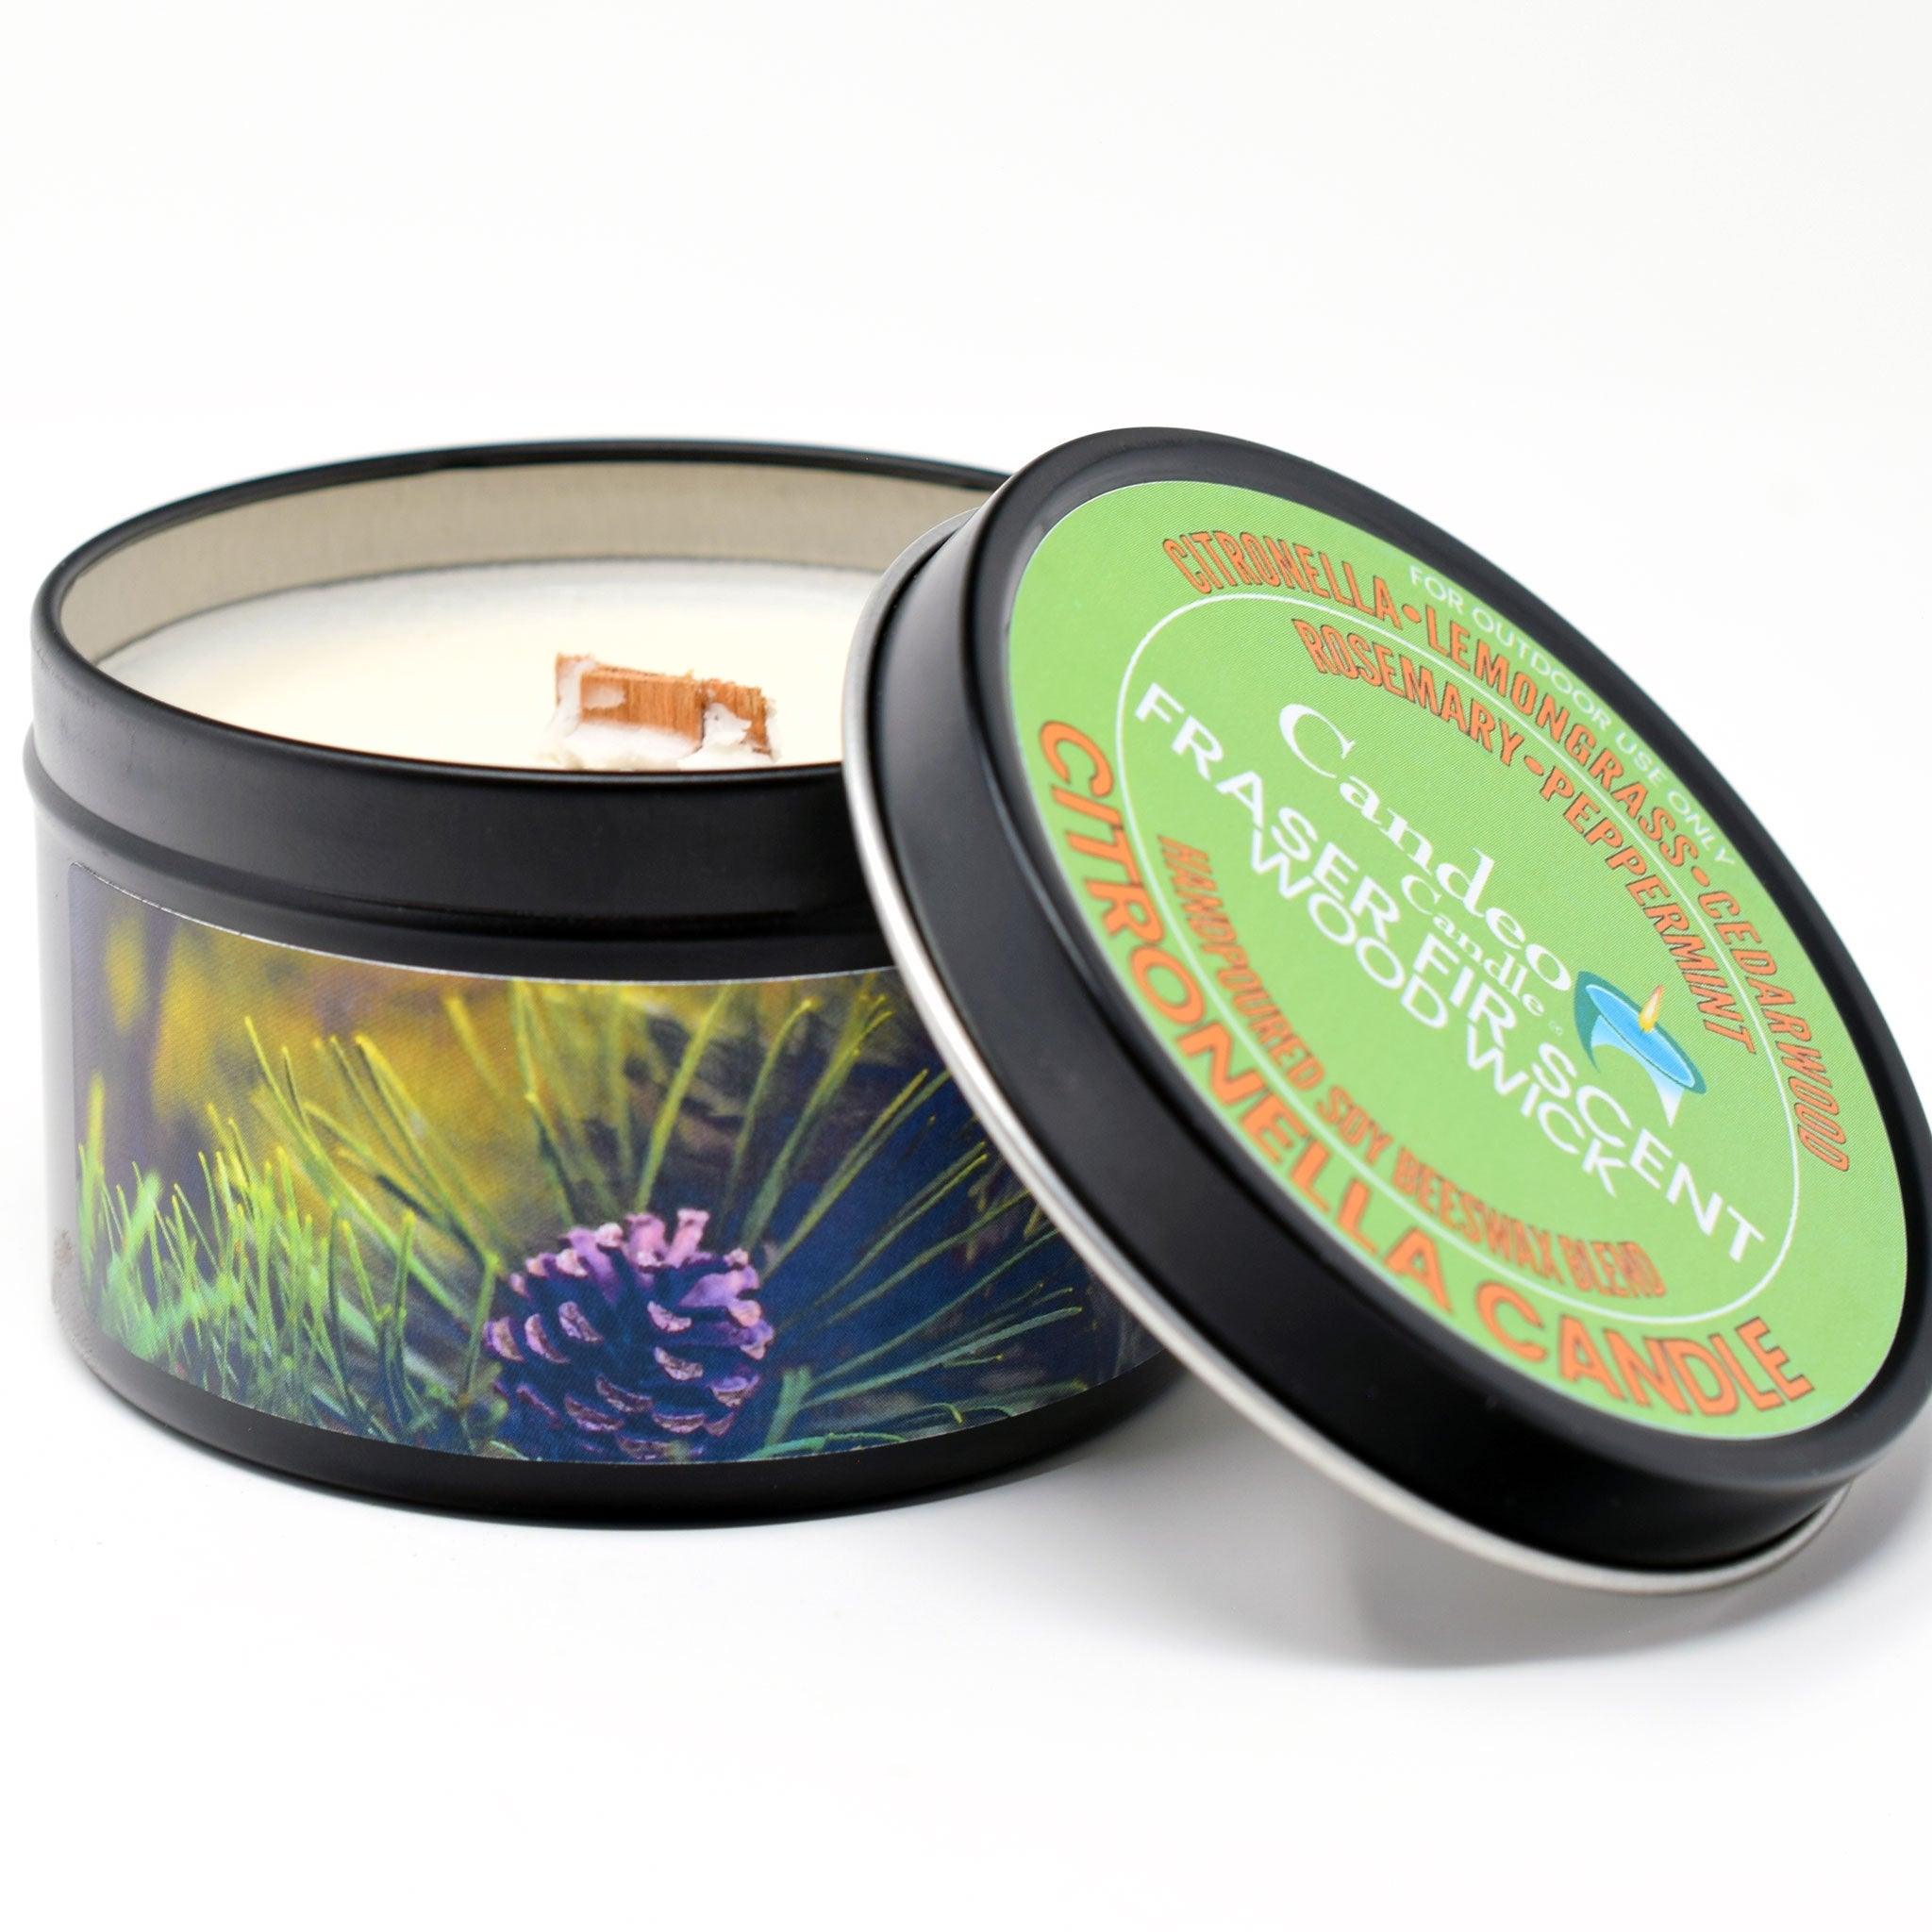 Citronella Fraser Fir Candle, Soy/Beeswax Blend, Wood Wick, 6oz Black Tin - Candeo Candle